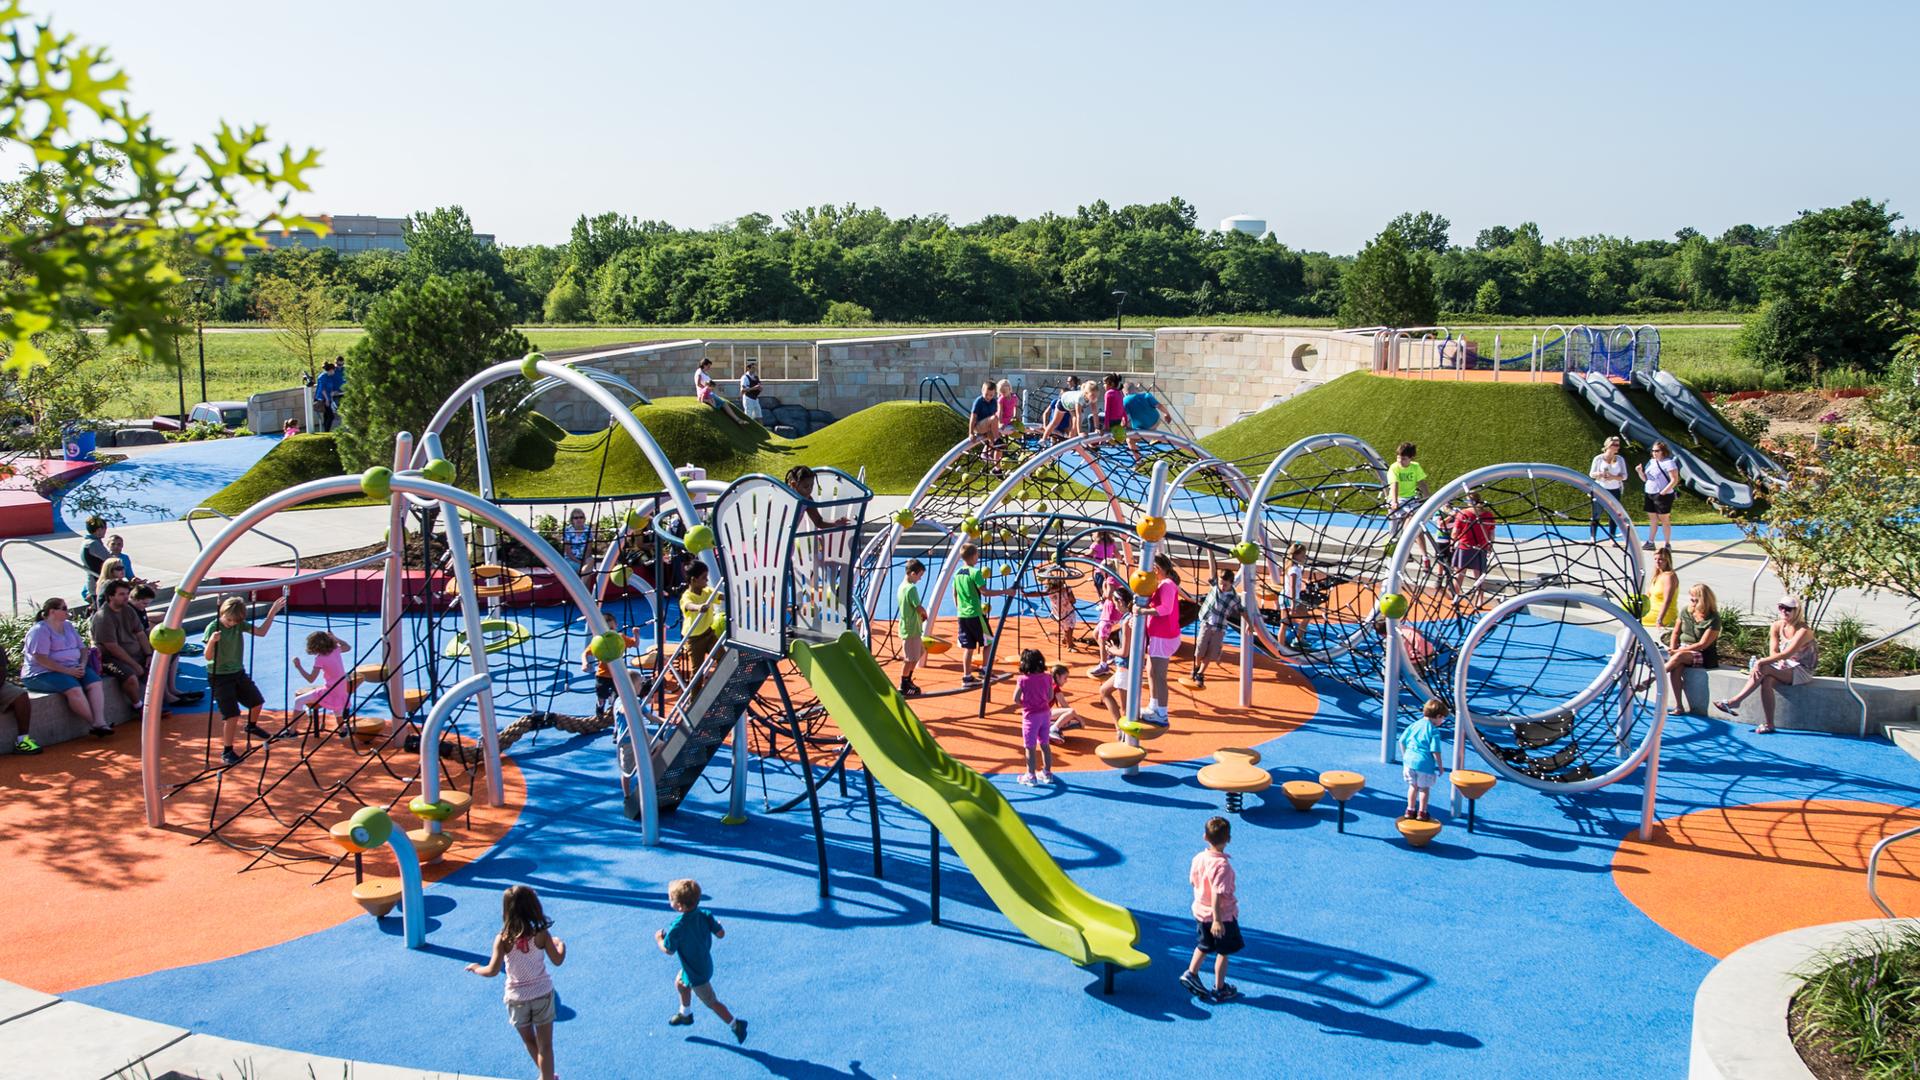 A huge custom playscape filled with net climbers for ages 2-12 and a green slide in the foreground and navy blue hill slides in the background. 